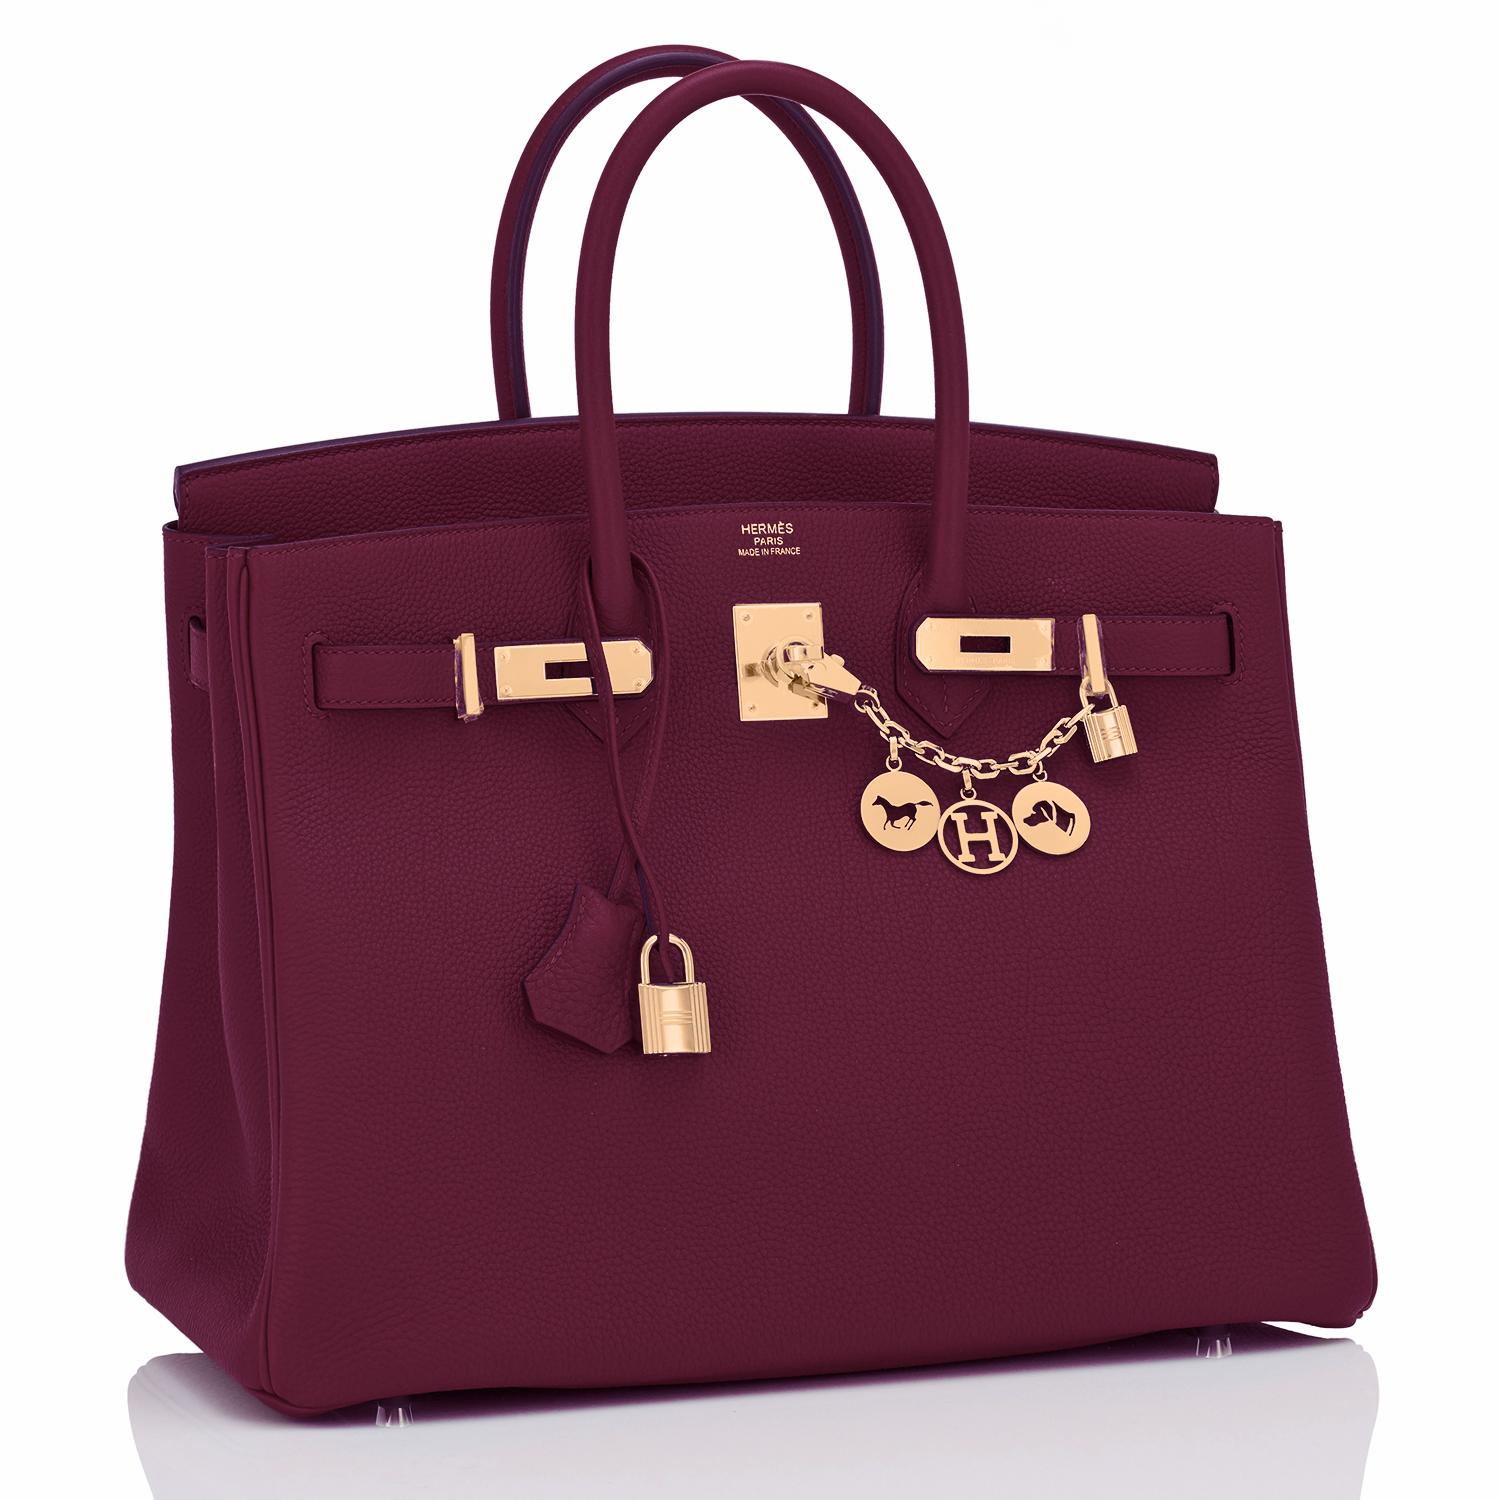 Hermes Birkin 35cm Rouge H Togo Gold Deep Bordeaux Red Birkin Bag Y Stamp, 2020
The ultimate holiday gift for yourself or your loved one!
Just purchased from Hermes store; bag bears new 2020 interior Y Stamp.
Brand New in Box.  Store Fresh. 